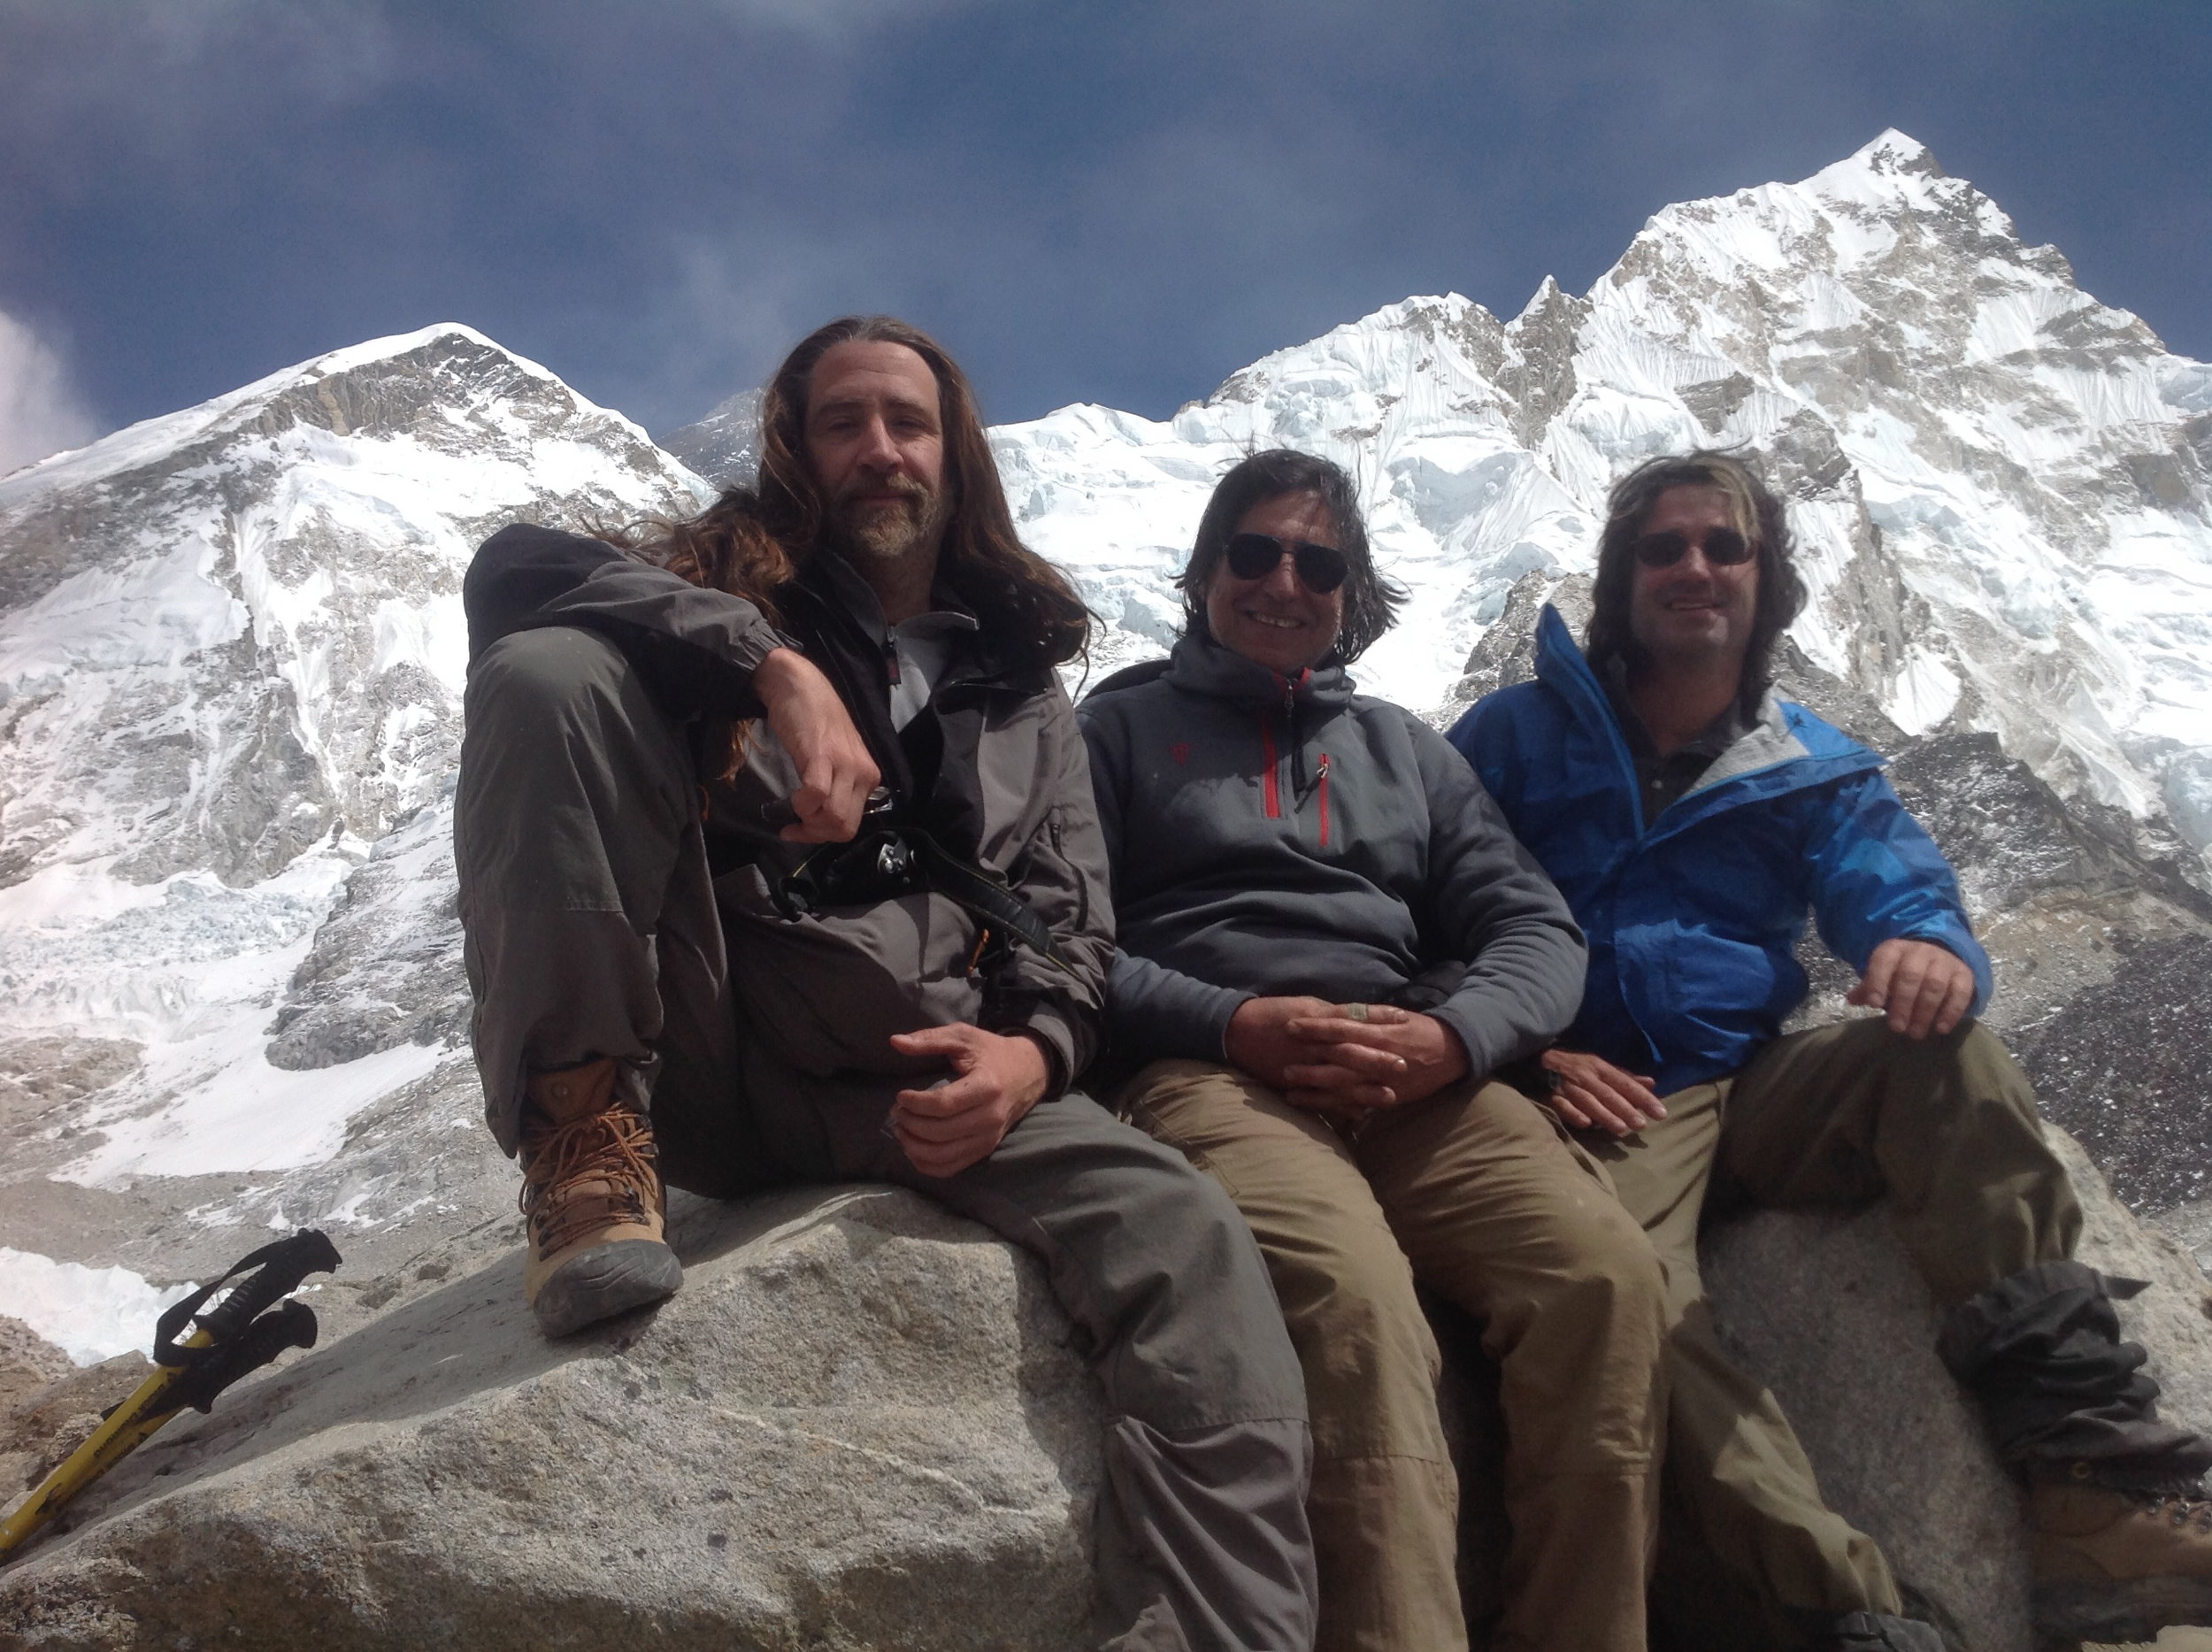 09_09 All 3 in front of Everest.jpg